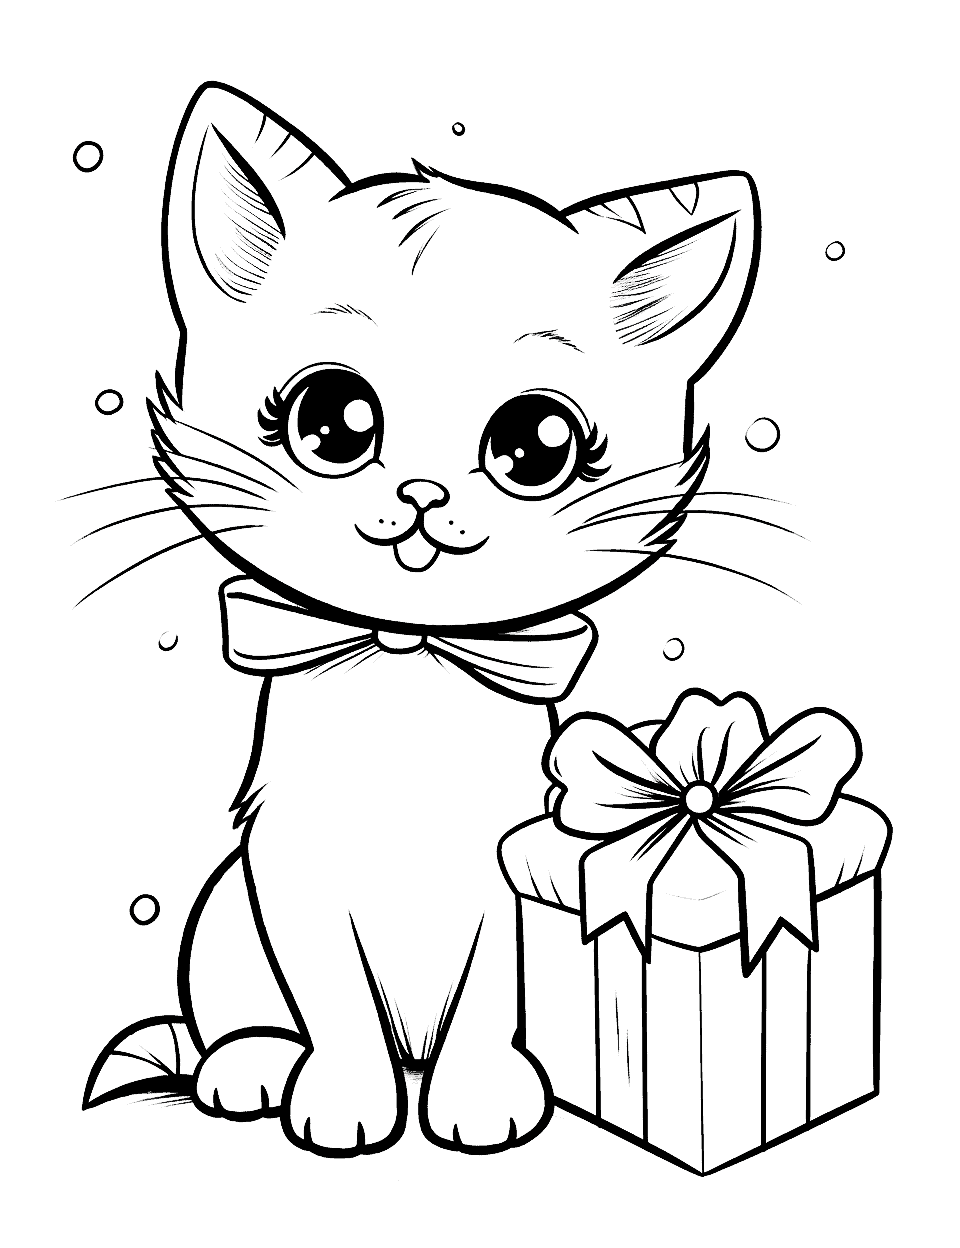 Kitten's Christmas Gift Kitten Coloring Page - Kitten sitting with a gift box.